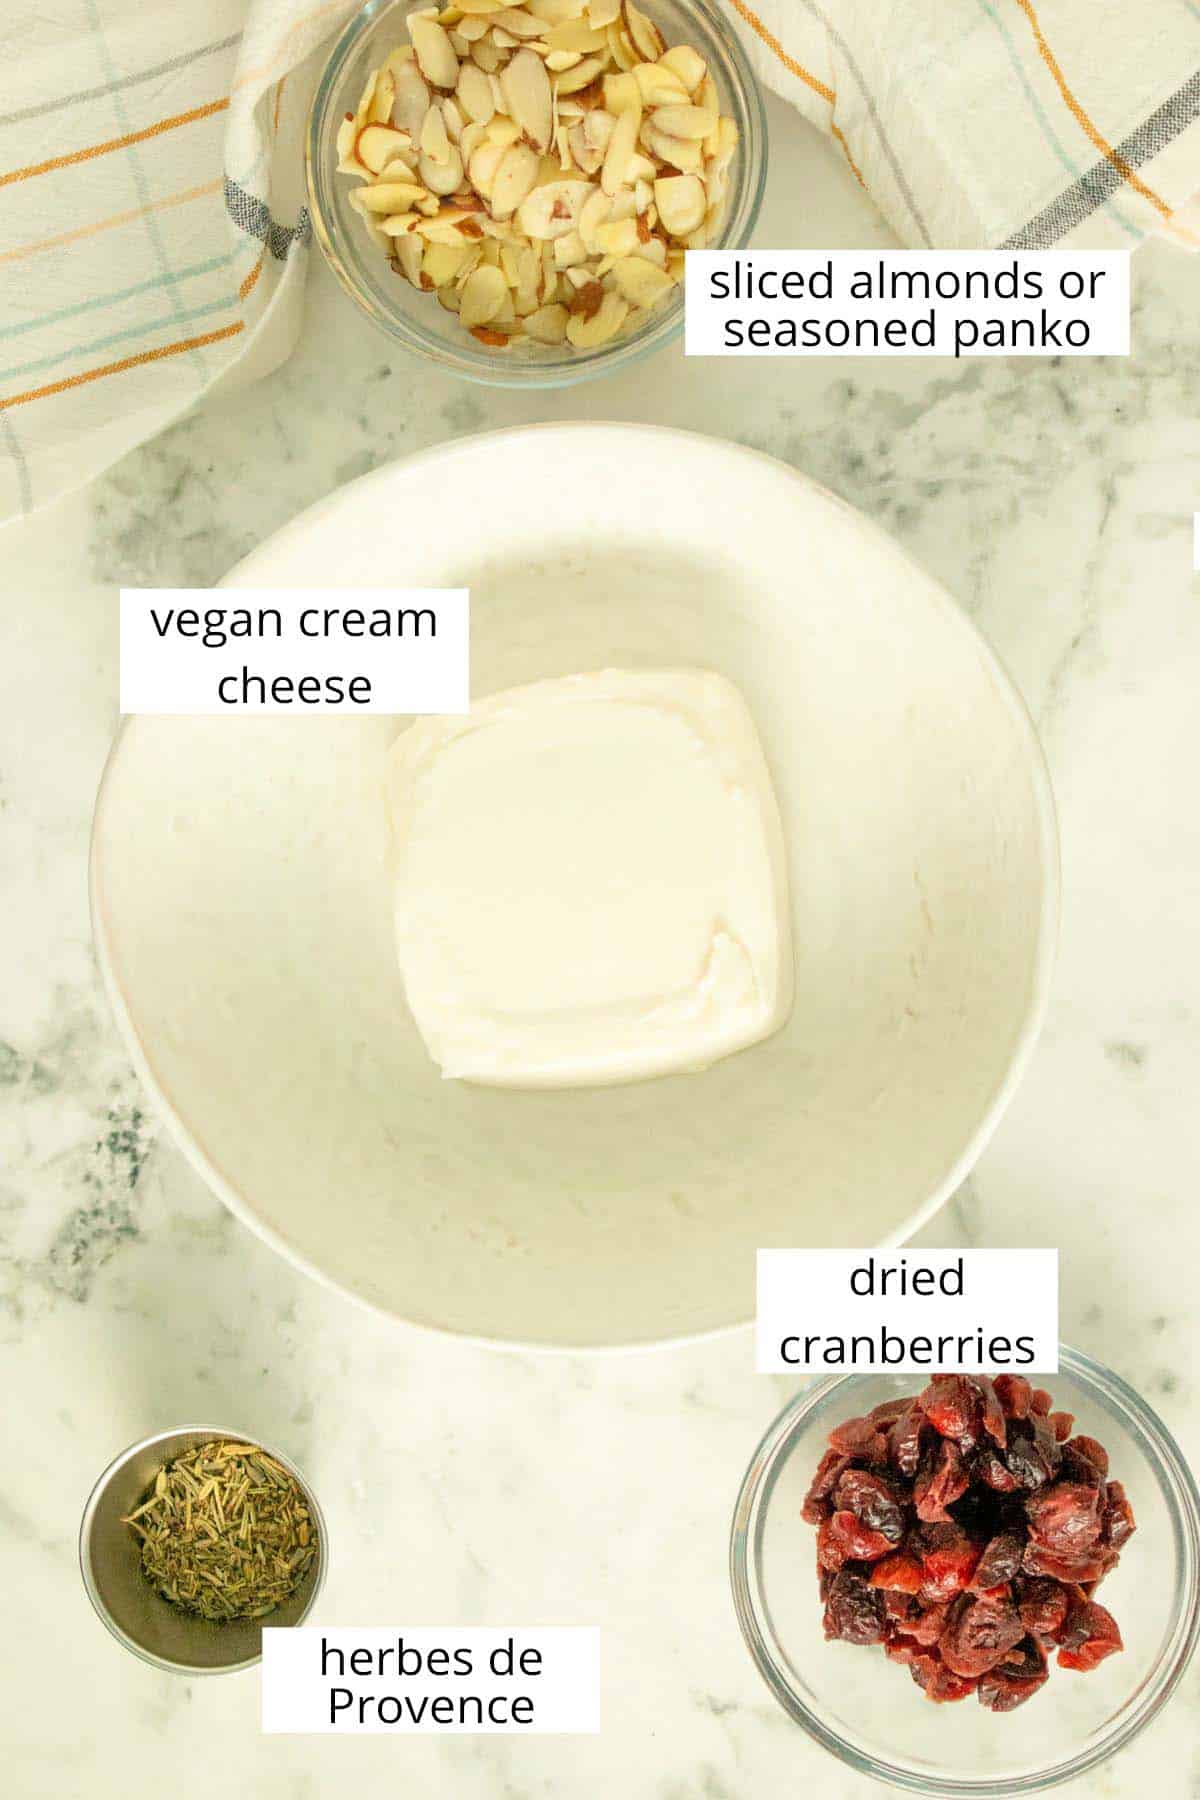 vegan cream cheese, herbs, cranberries, and almonds in bowls on a white table